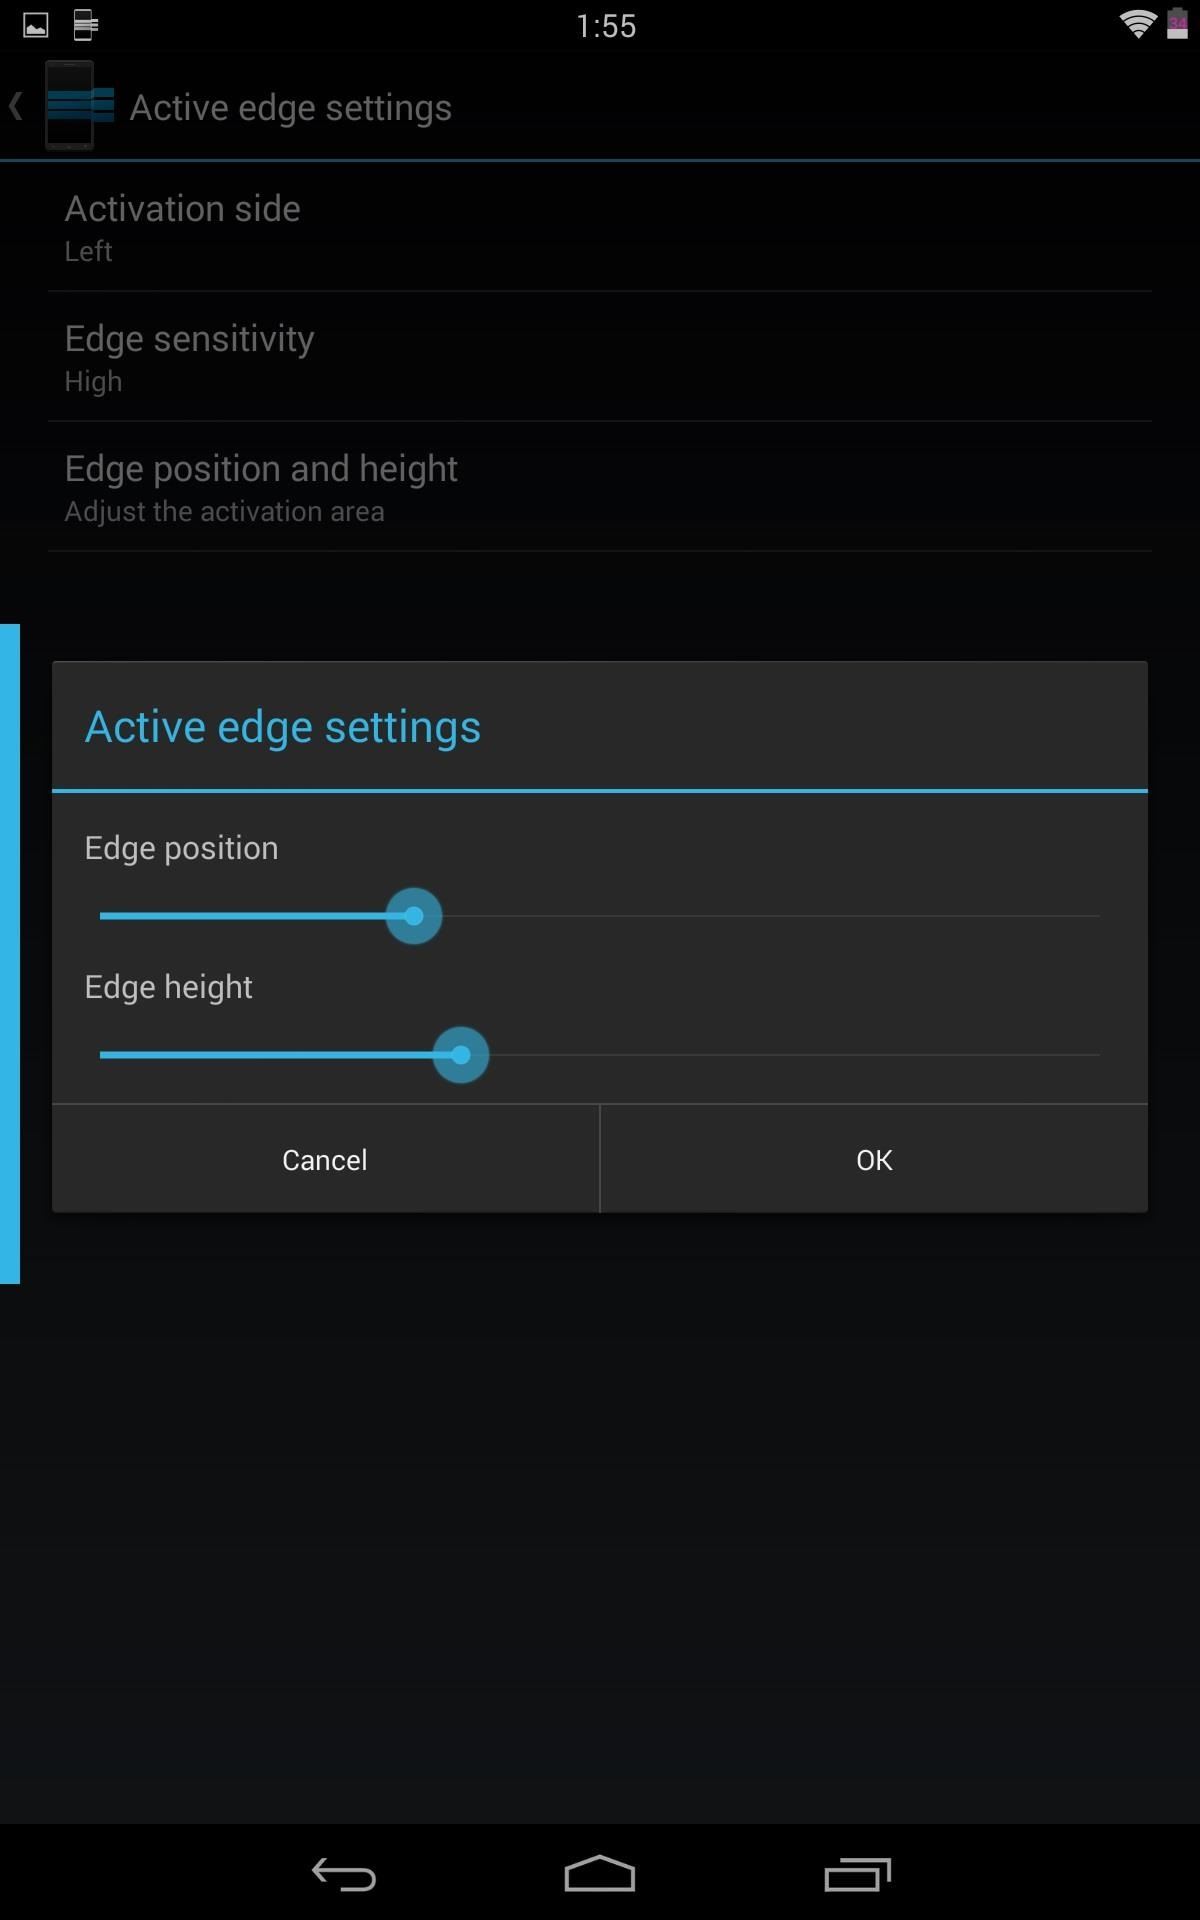 How to Multitask Like a Boss on Your Nexus 7 Tablet with Faster Access to Apps & Settings